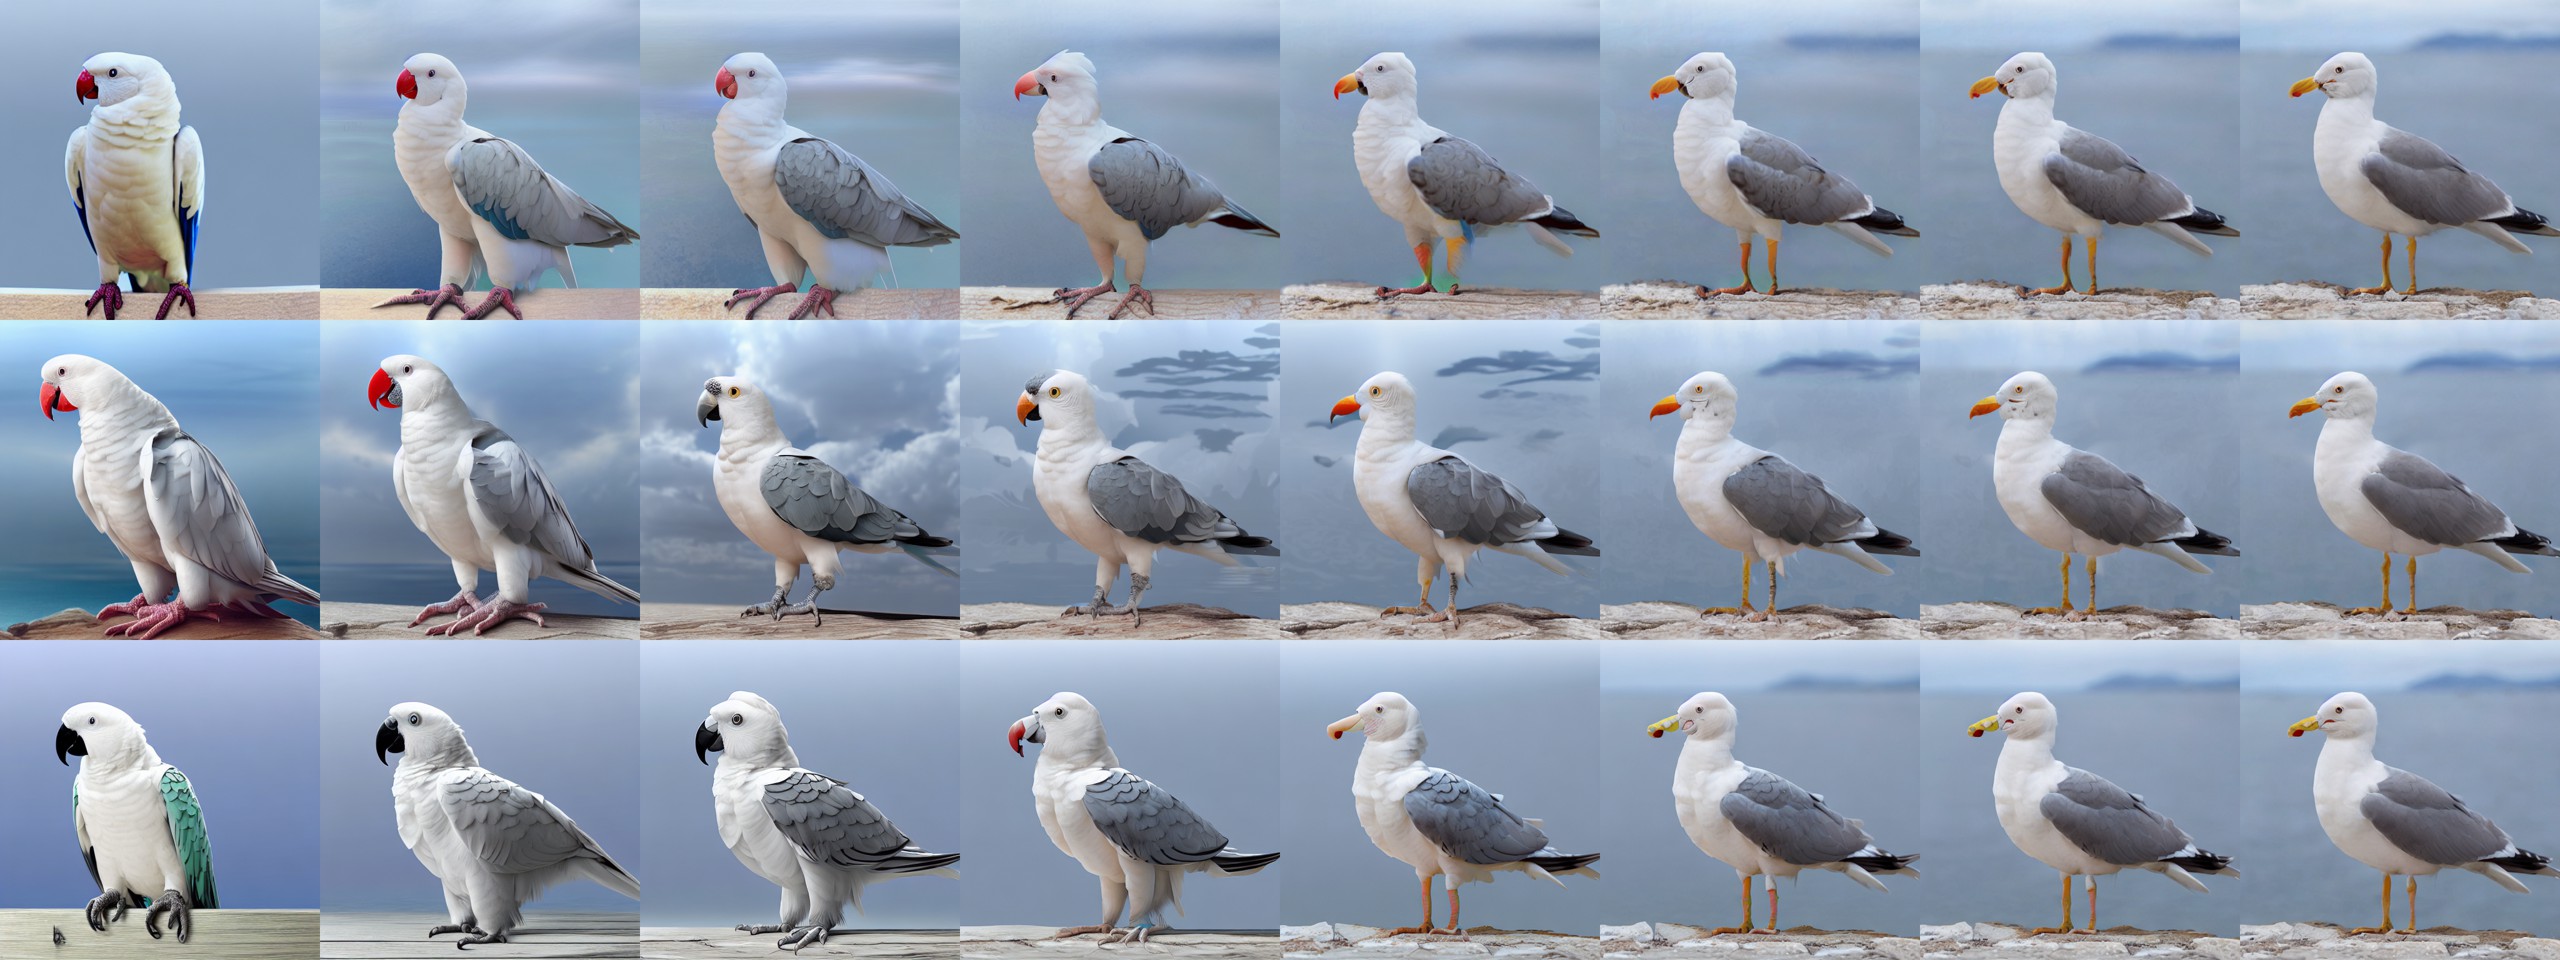 img2imgheavy_a_white_parrot_sitting_by_the_se_seagull_1